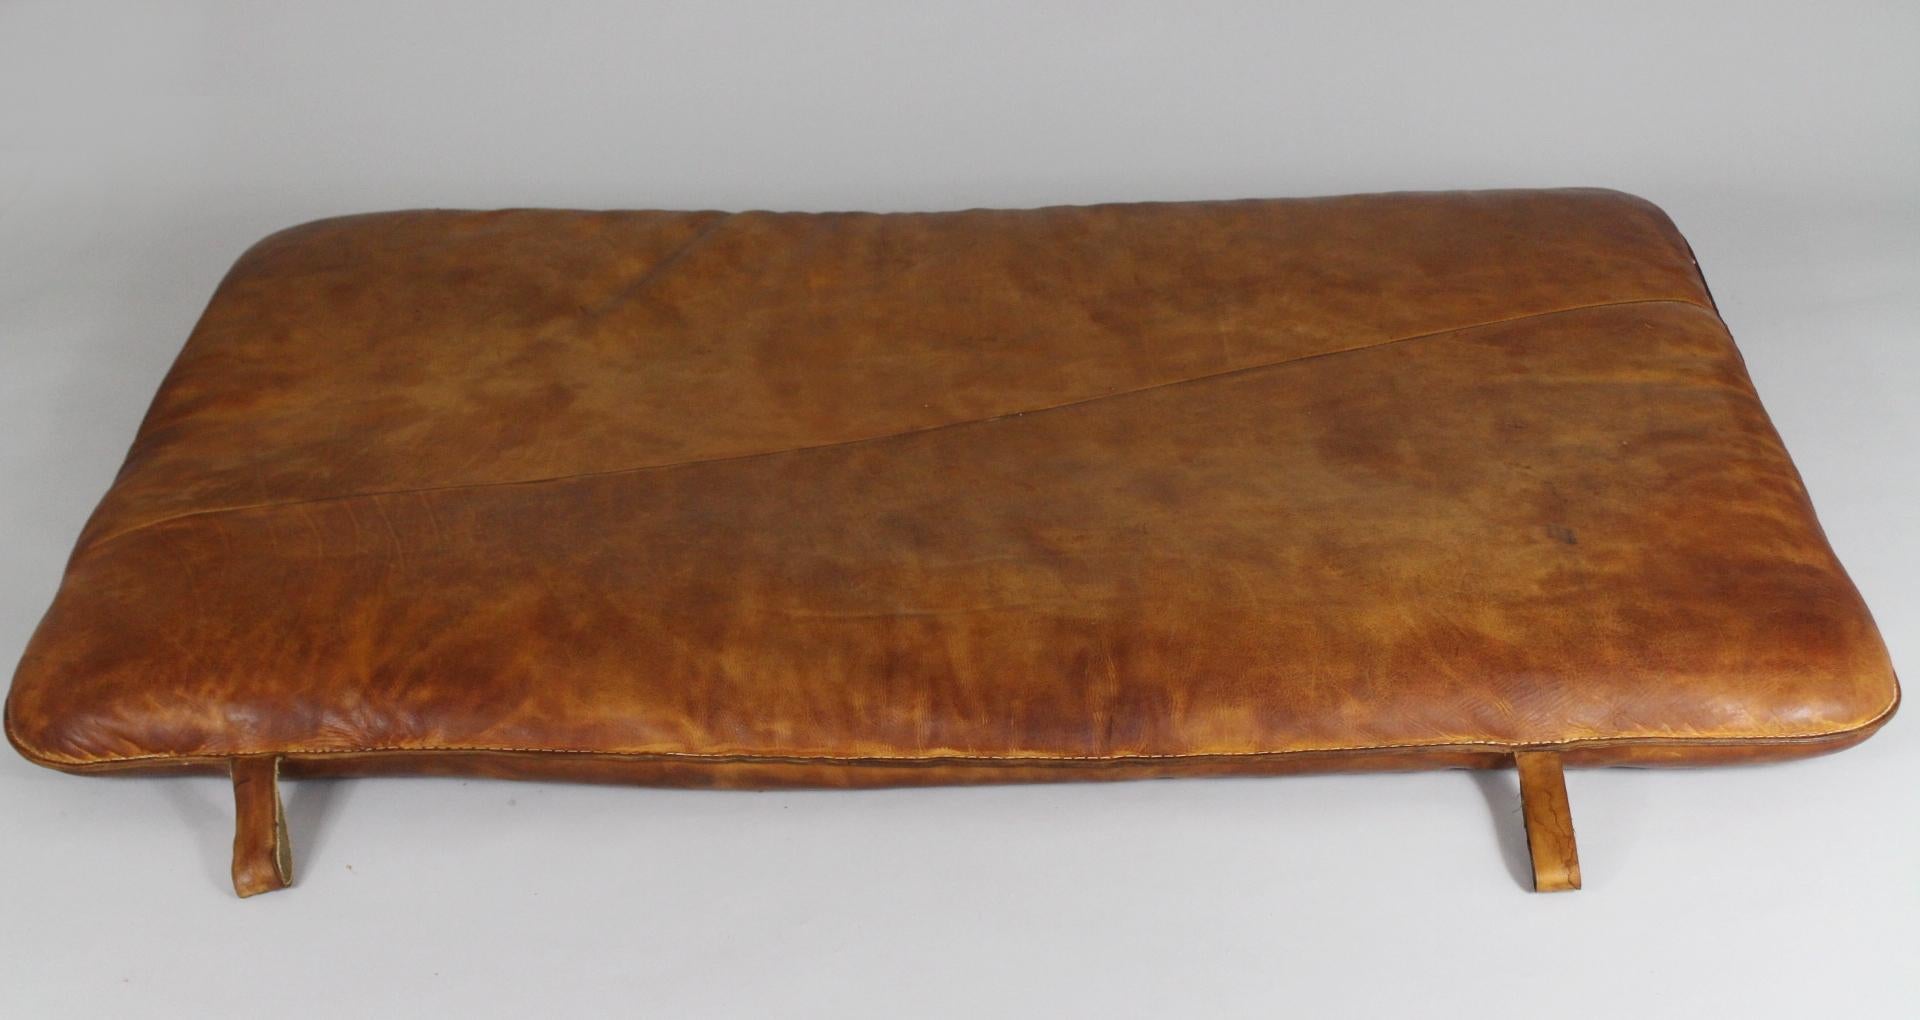 Leather gym mat from the 1930s. It is made from thick cow leather. Very good condition with patina.